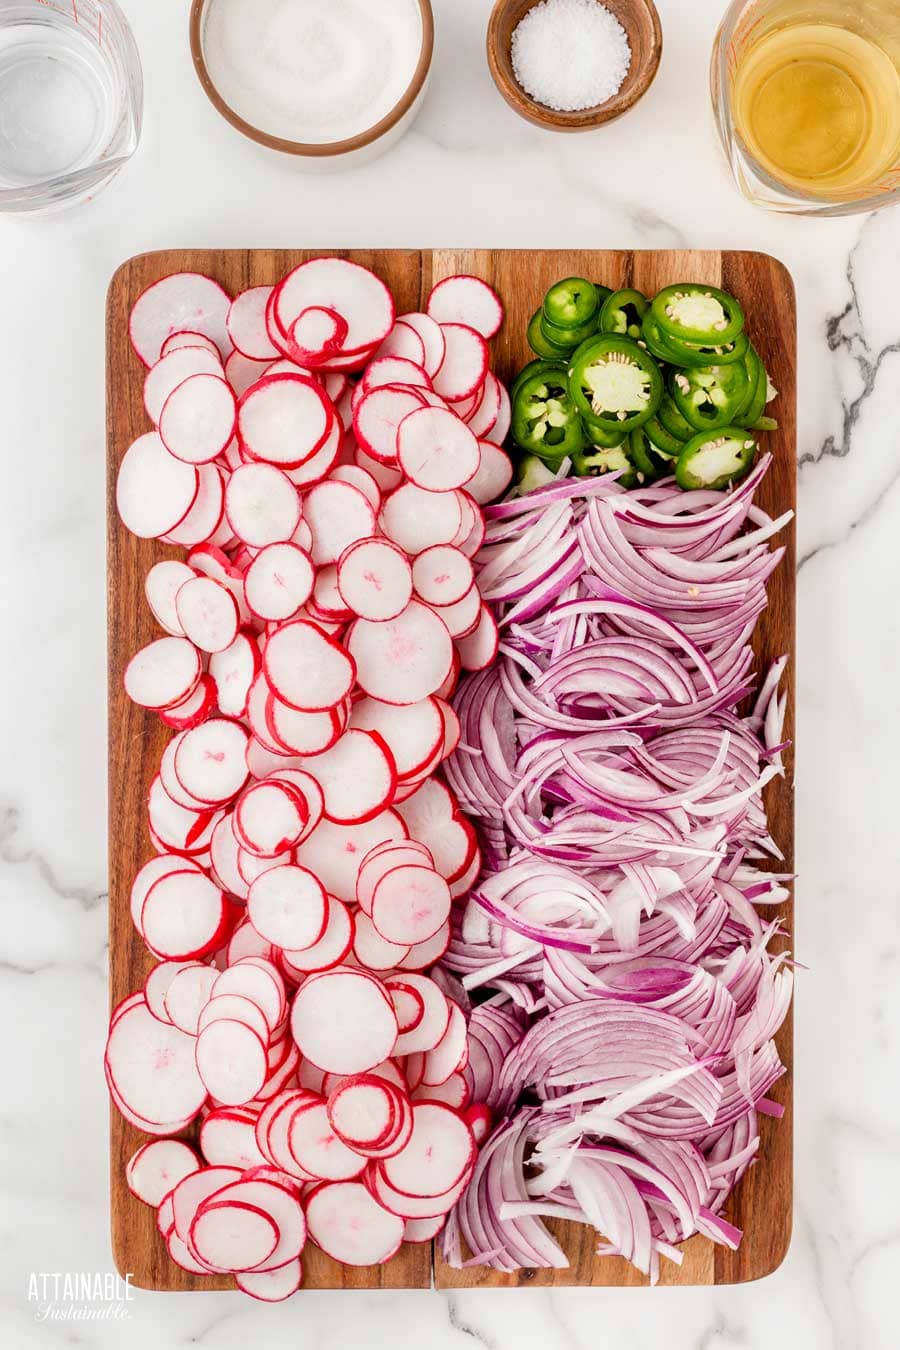 sliced radishes, red onions, and jalapeno pepper on a wooden cutting board.